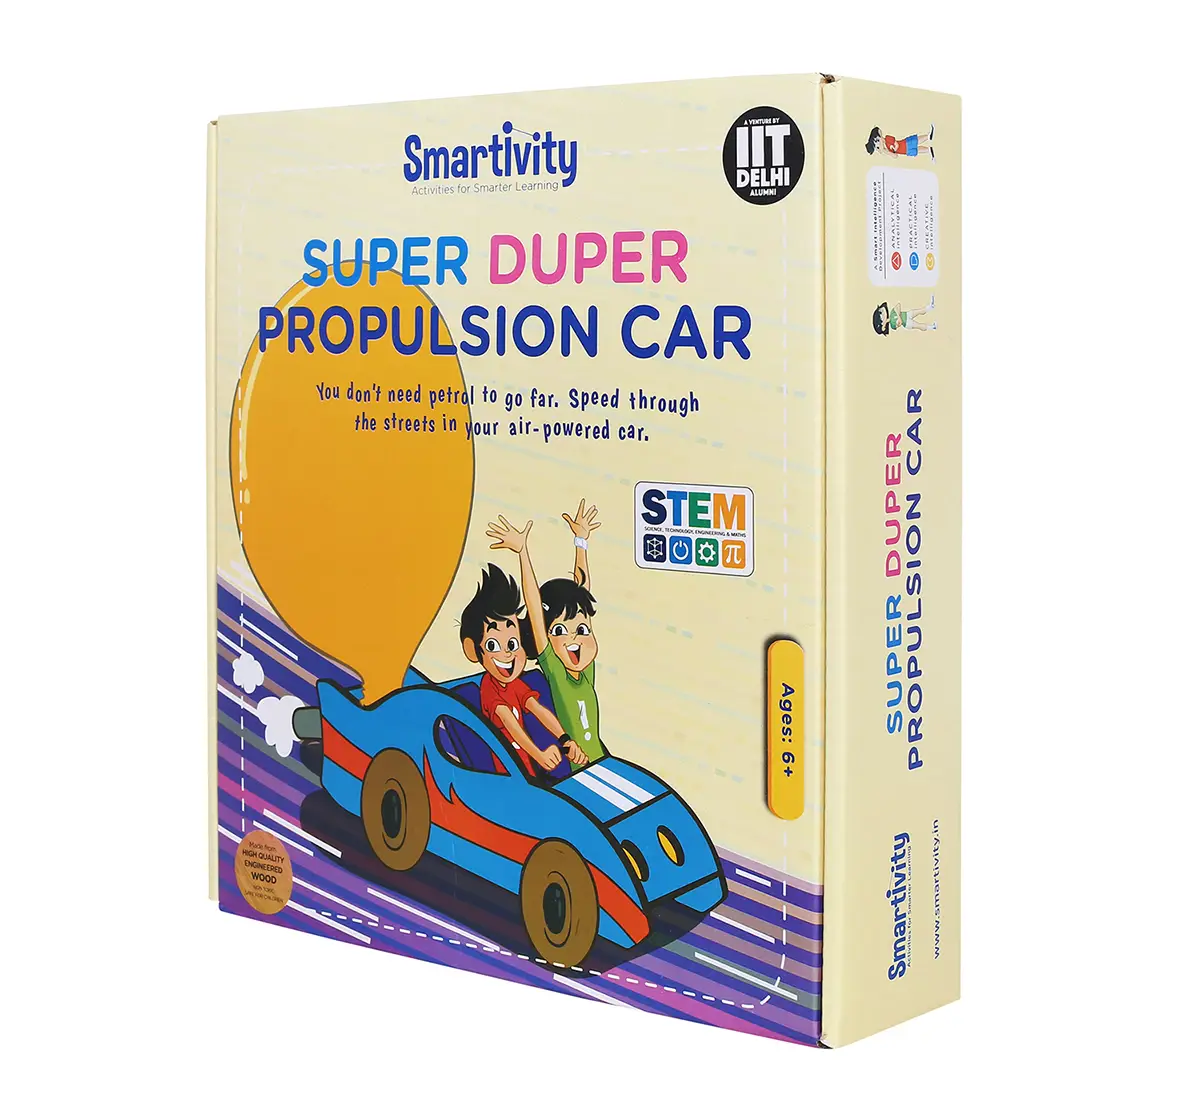 Smartivity Super Duper Propulsion Car: Stem, Learning, Educational And Construction Activity Toy Gift for Kids age 6Y+  (Multi-Color)